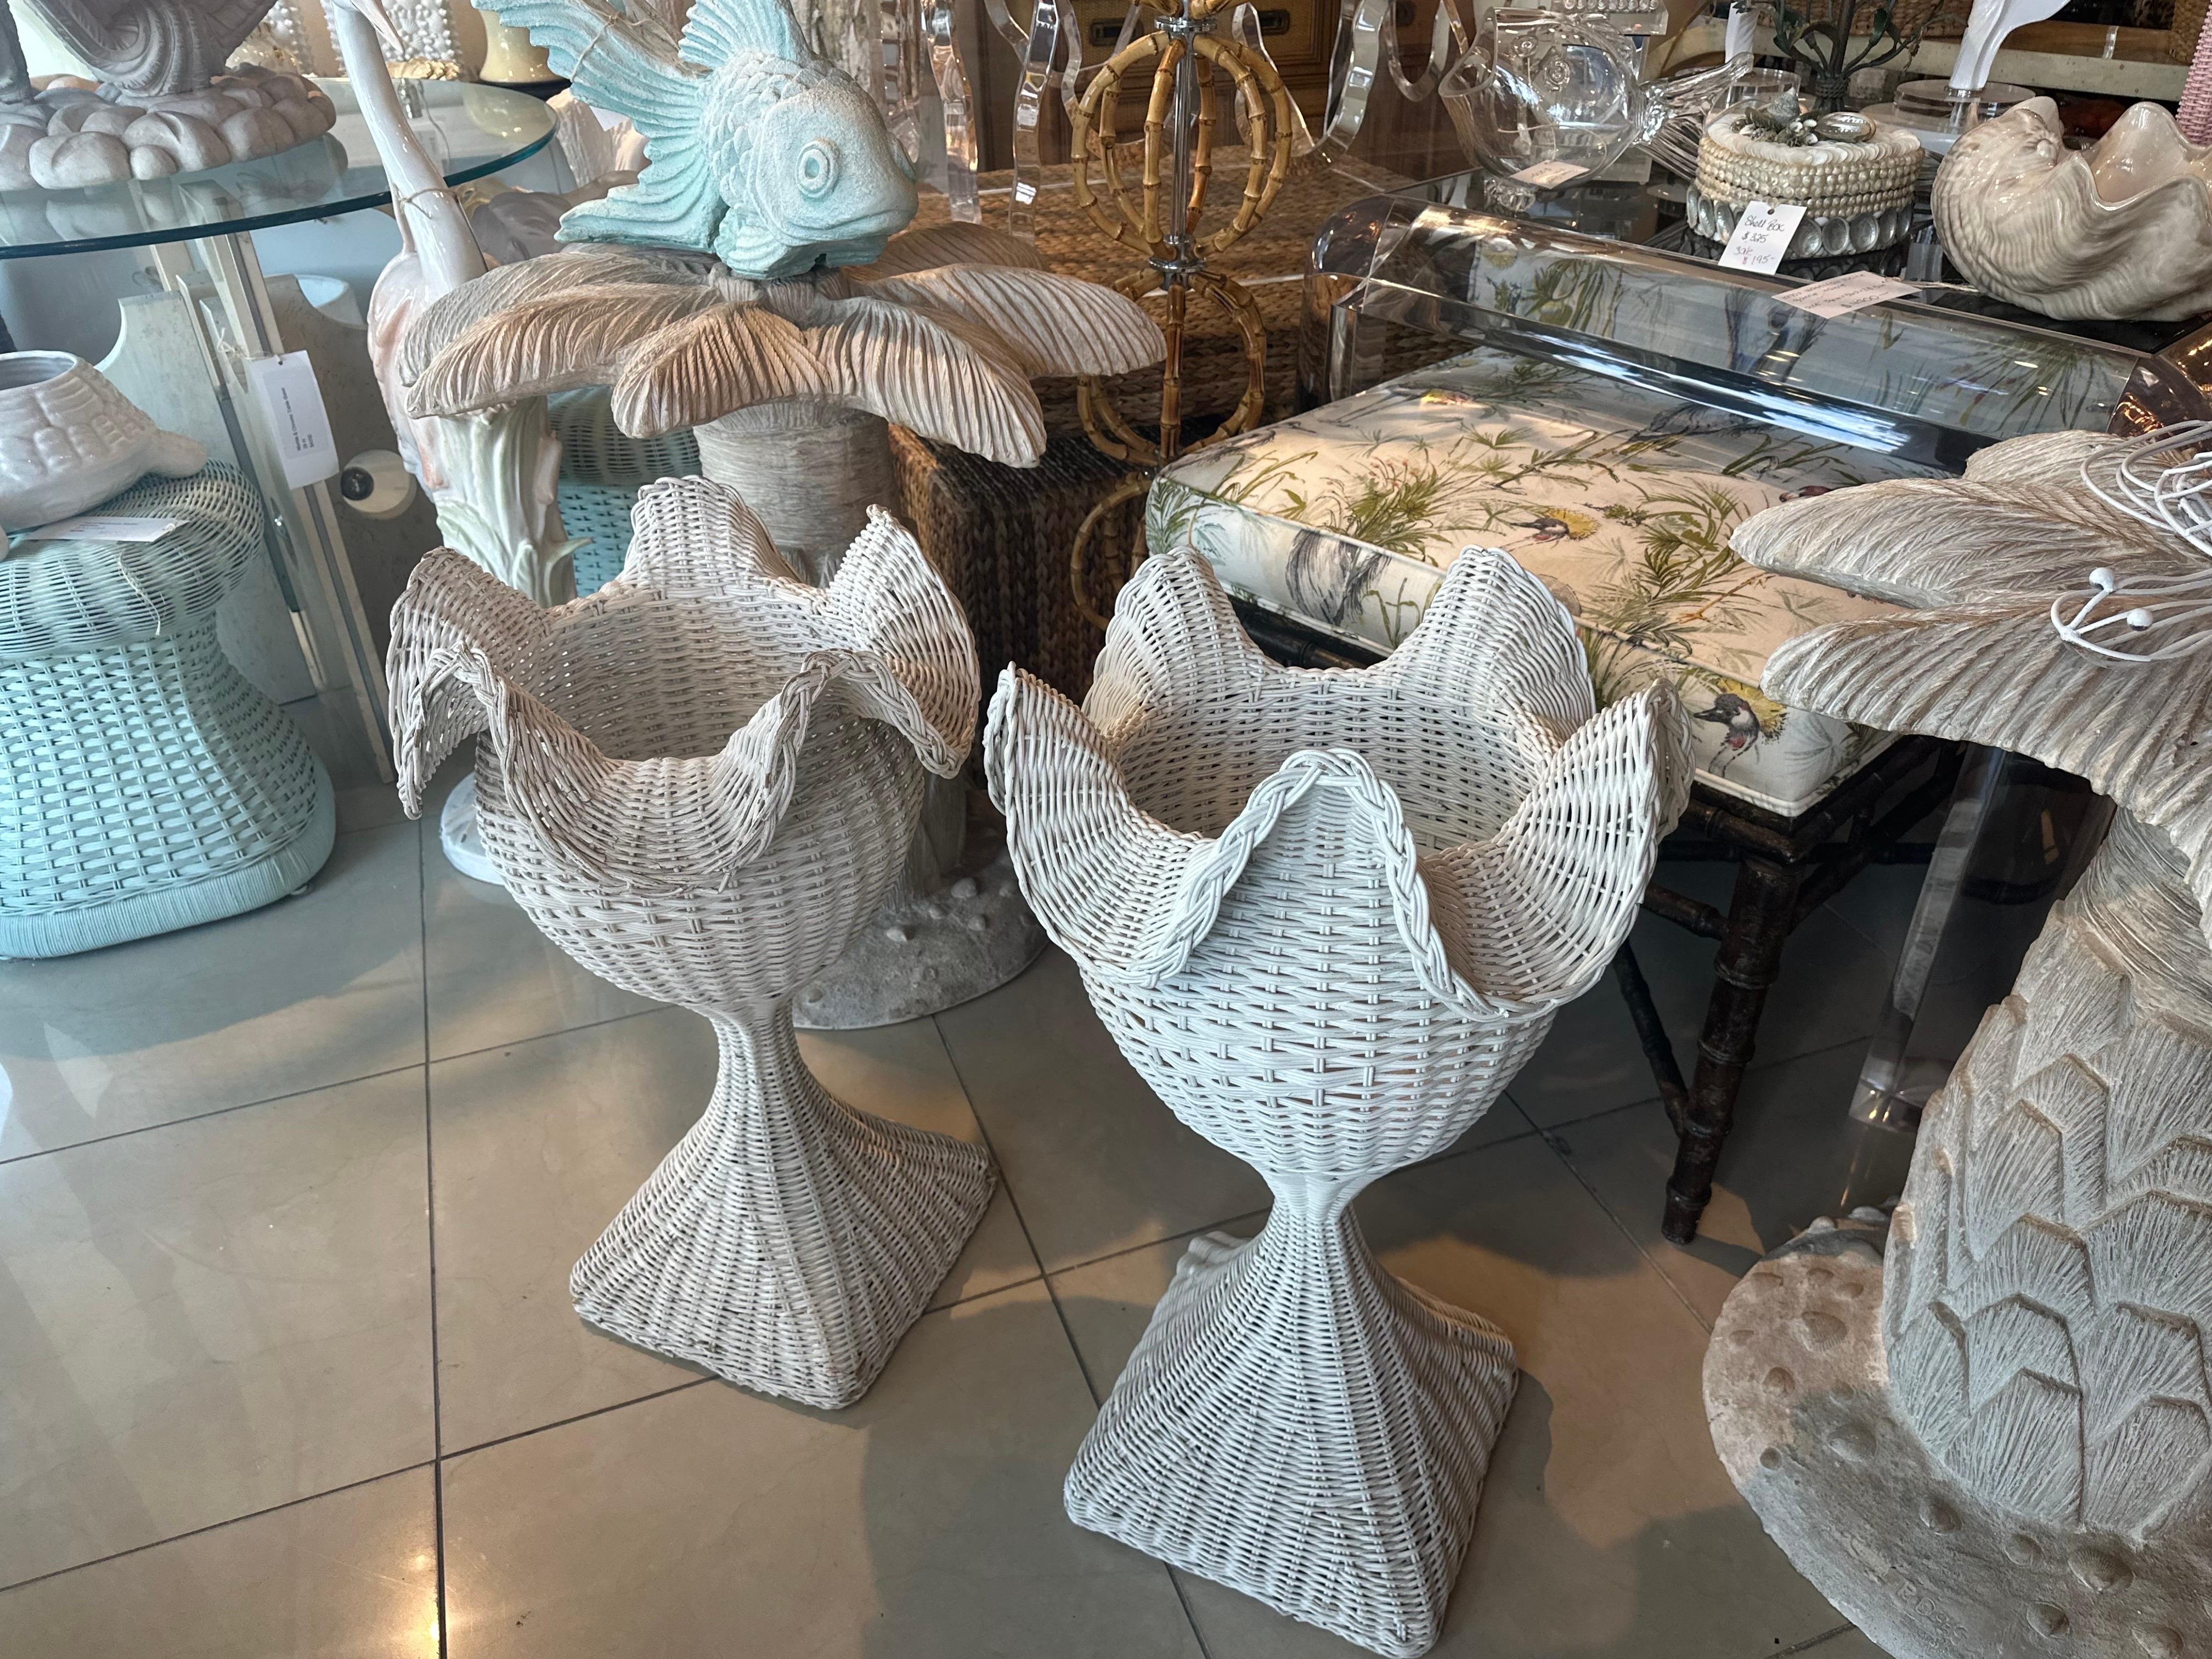 Lovely pair of vintage 1940s French chippy white wicker, scalloped, ruffled edge planters. Original vintage white paint finish is chippy in spots and worn in others. May be slight variations in shape or size due to the handmade nature of wicker.